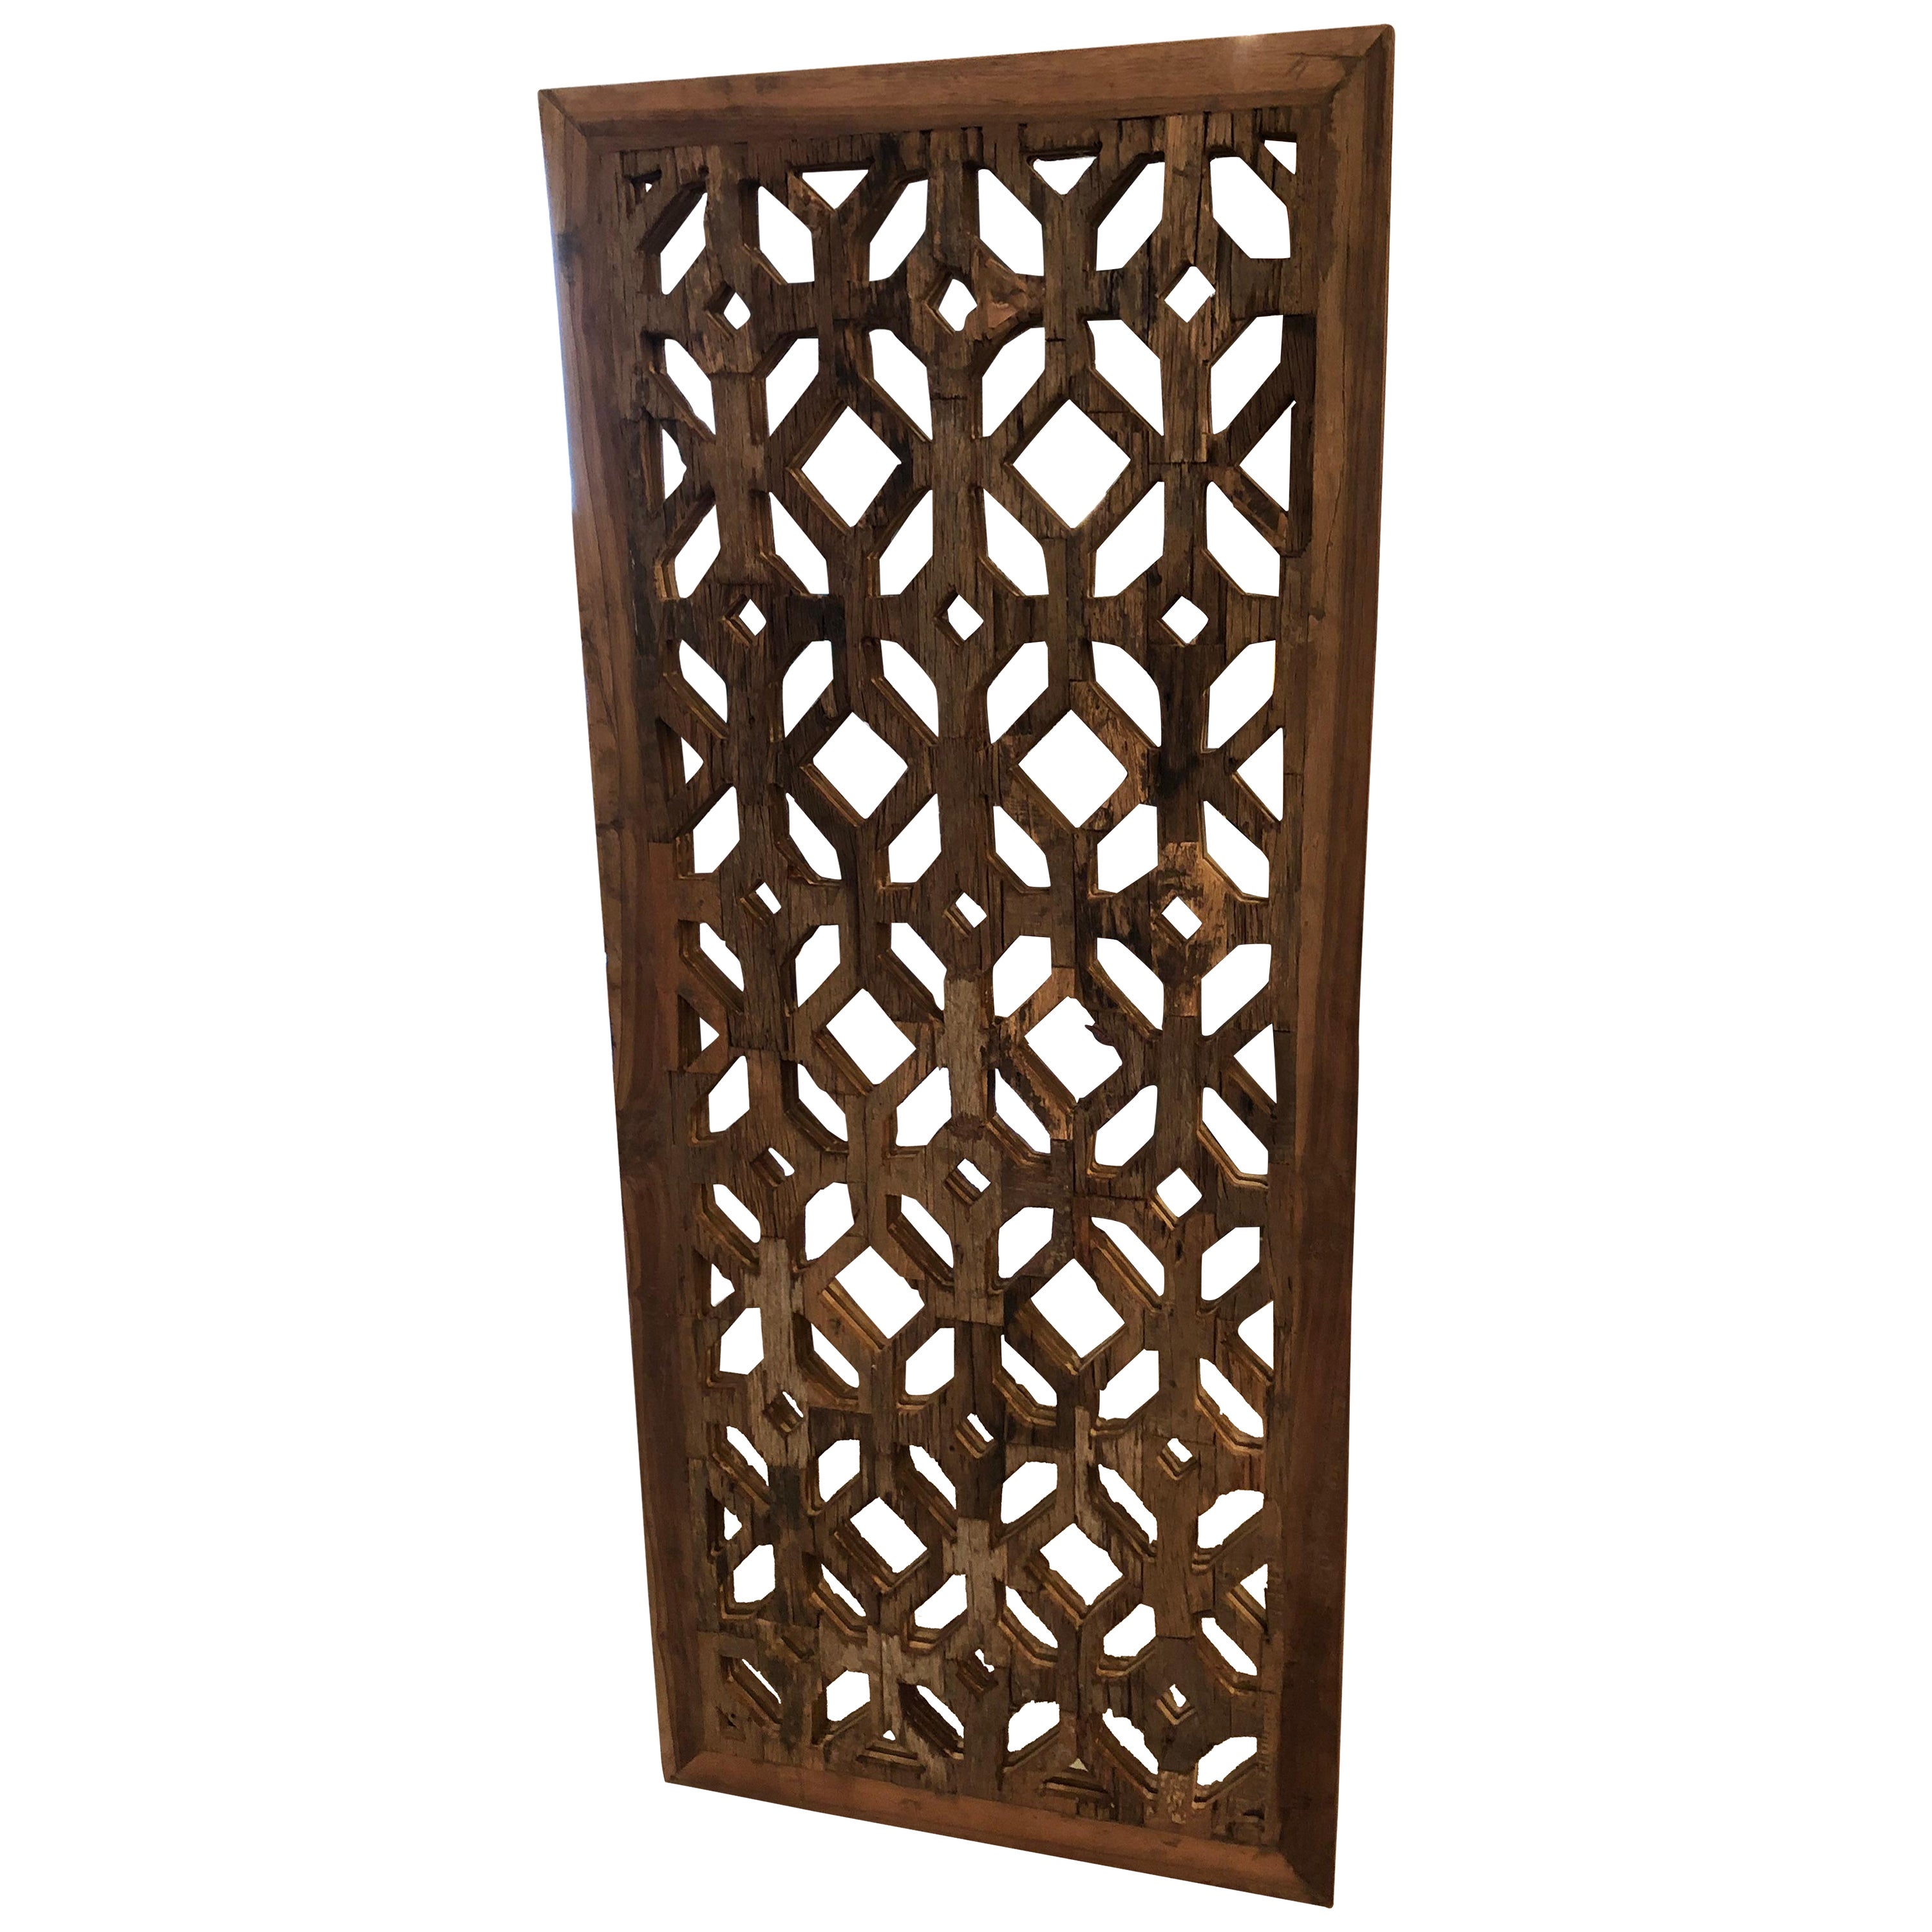 Fascinating Textural Rustic Carved Wood & Mirrored Panel For Sale